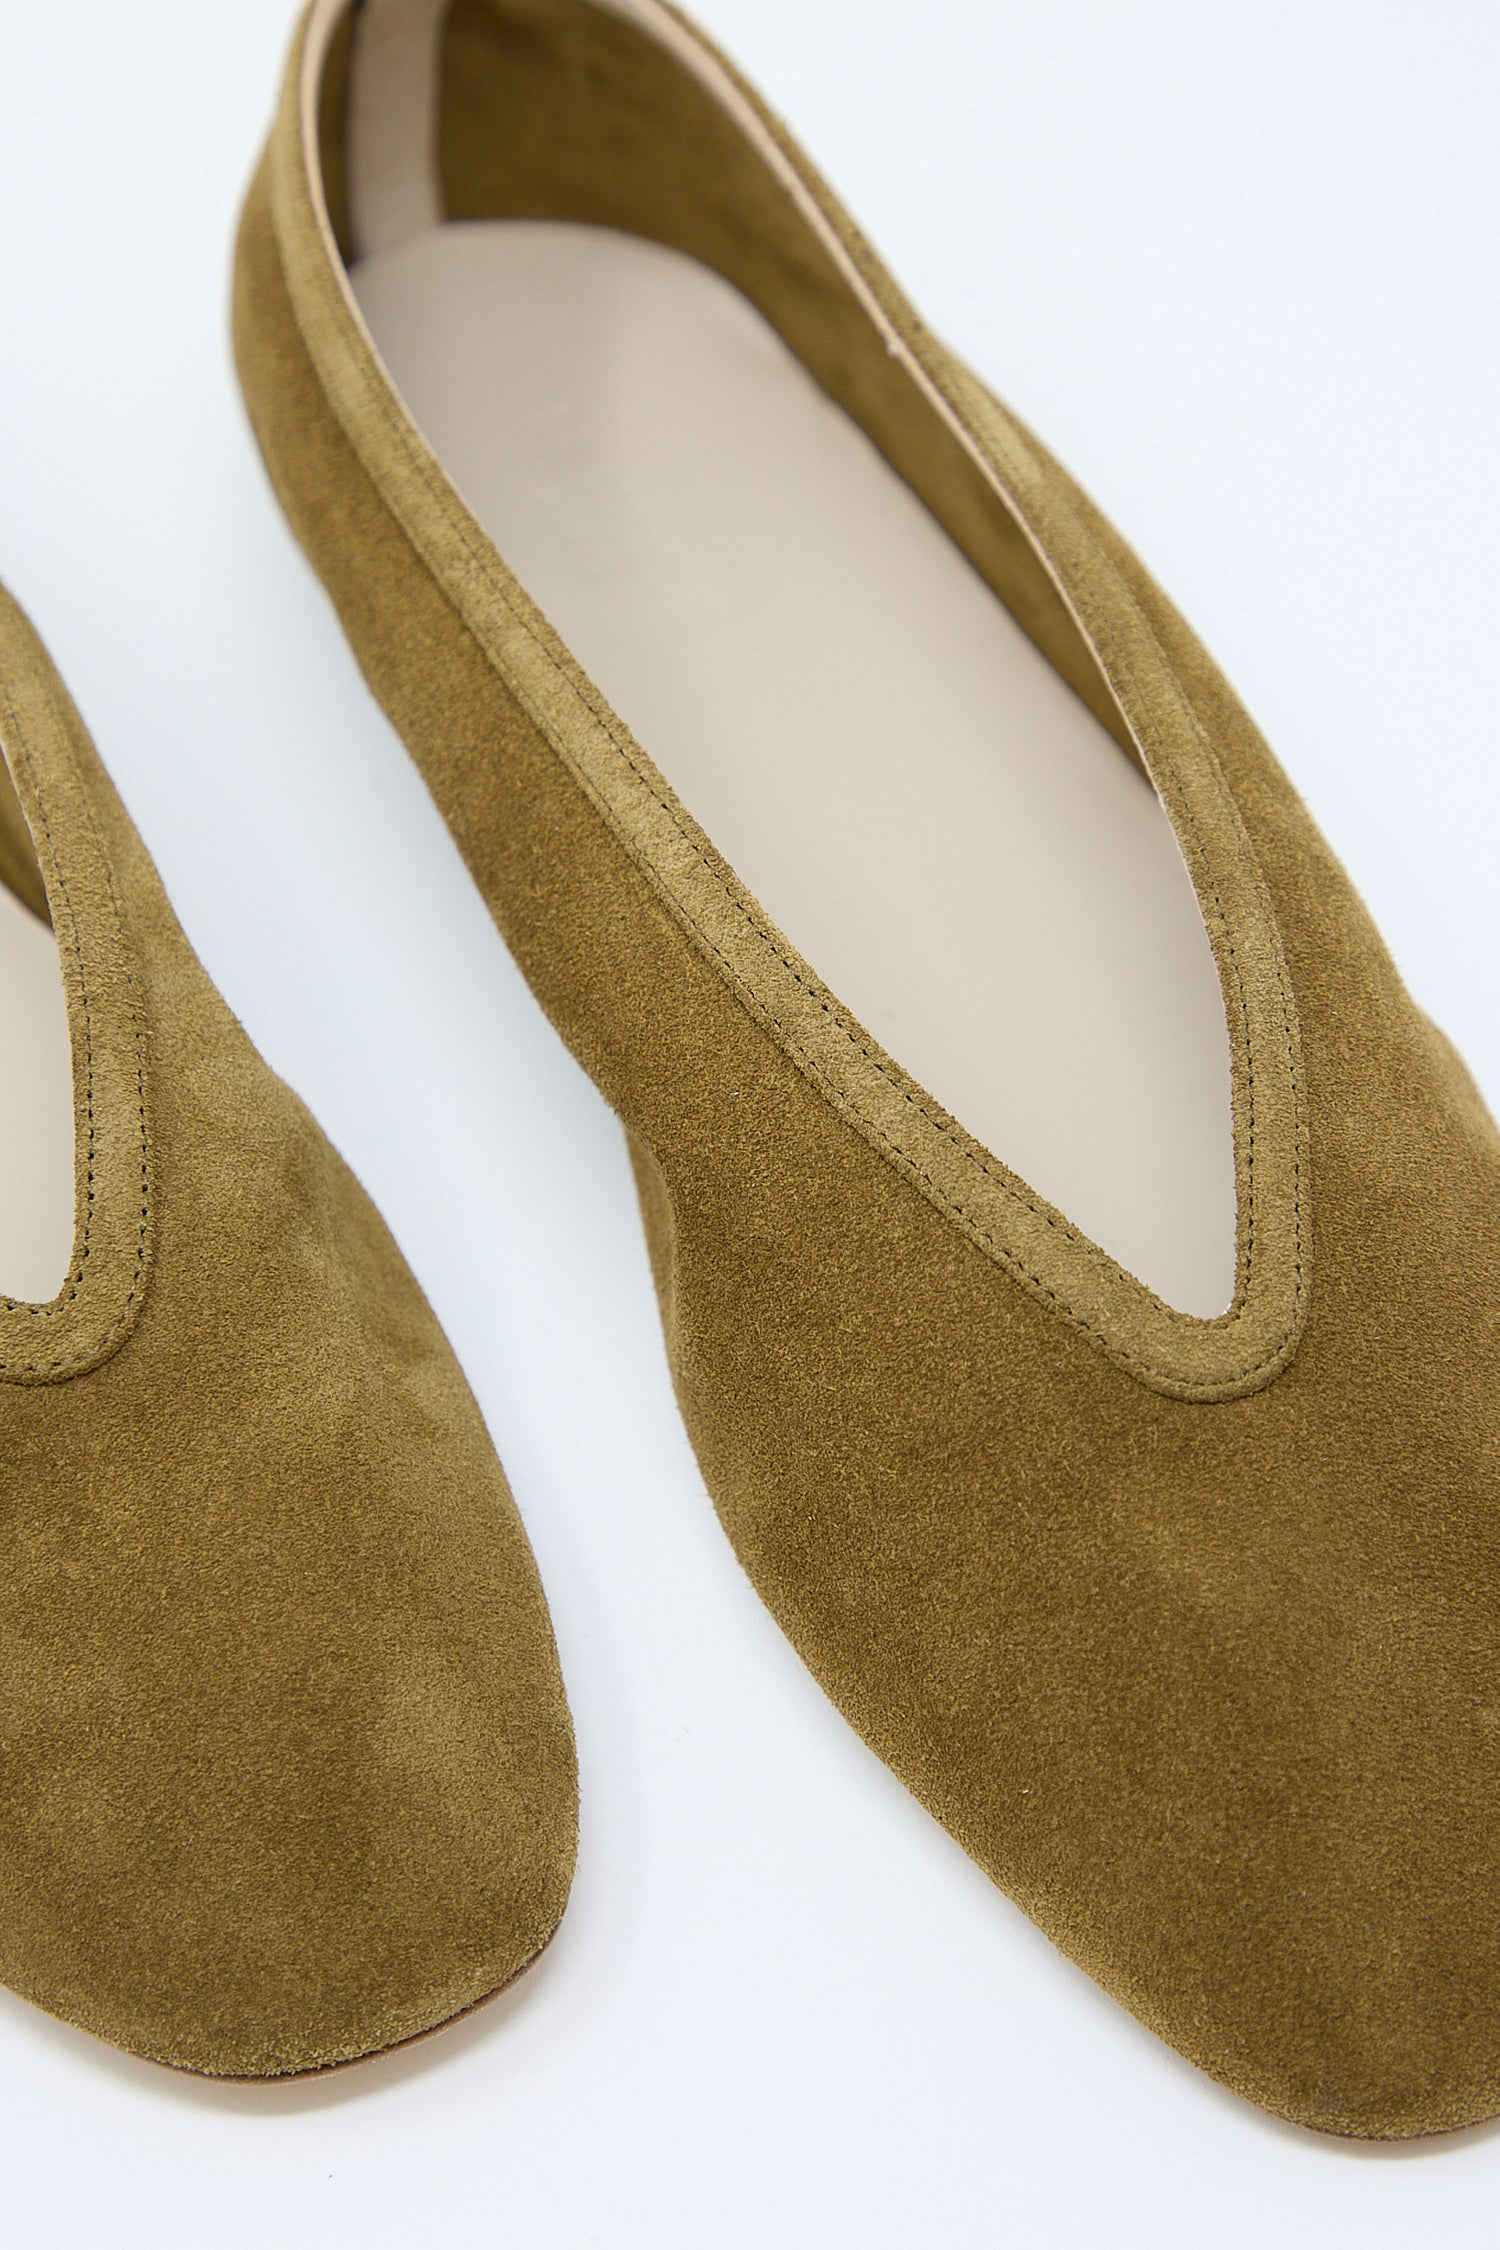 A pair of taupe suede Luna slippers from Le Monde Beryl on a white background. Up close.